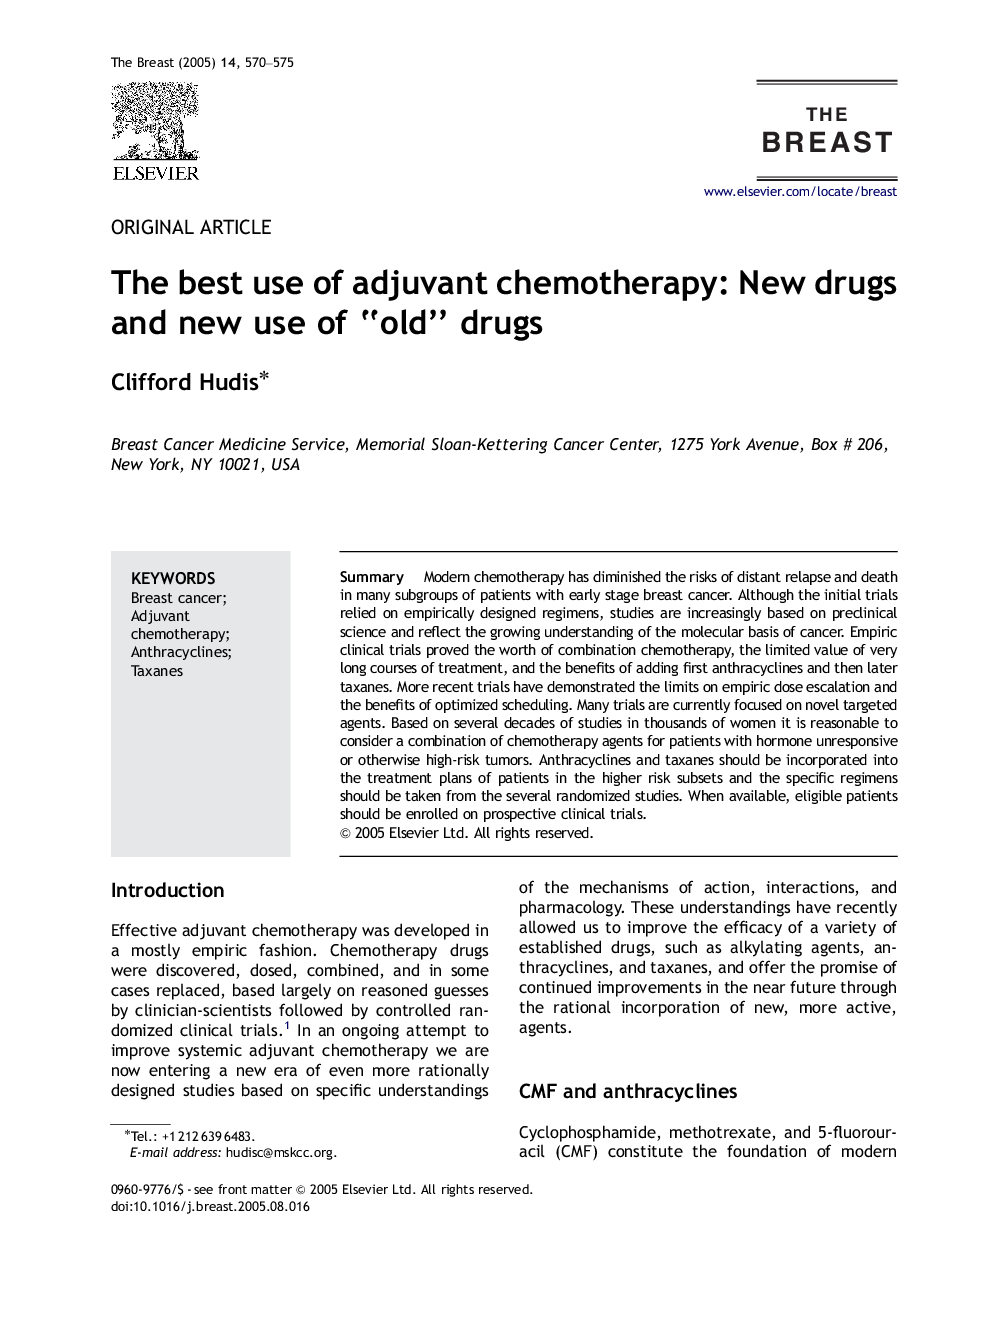 The best use of adjuvant chemotherapy: New drugs and new use of “old” drugs